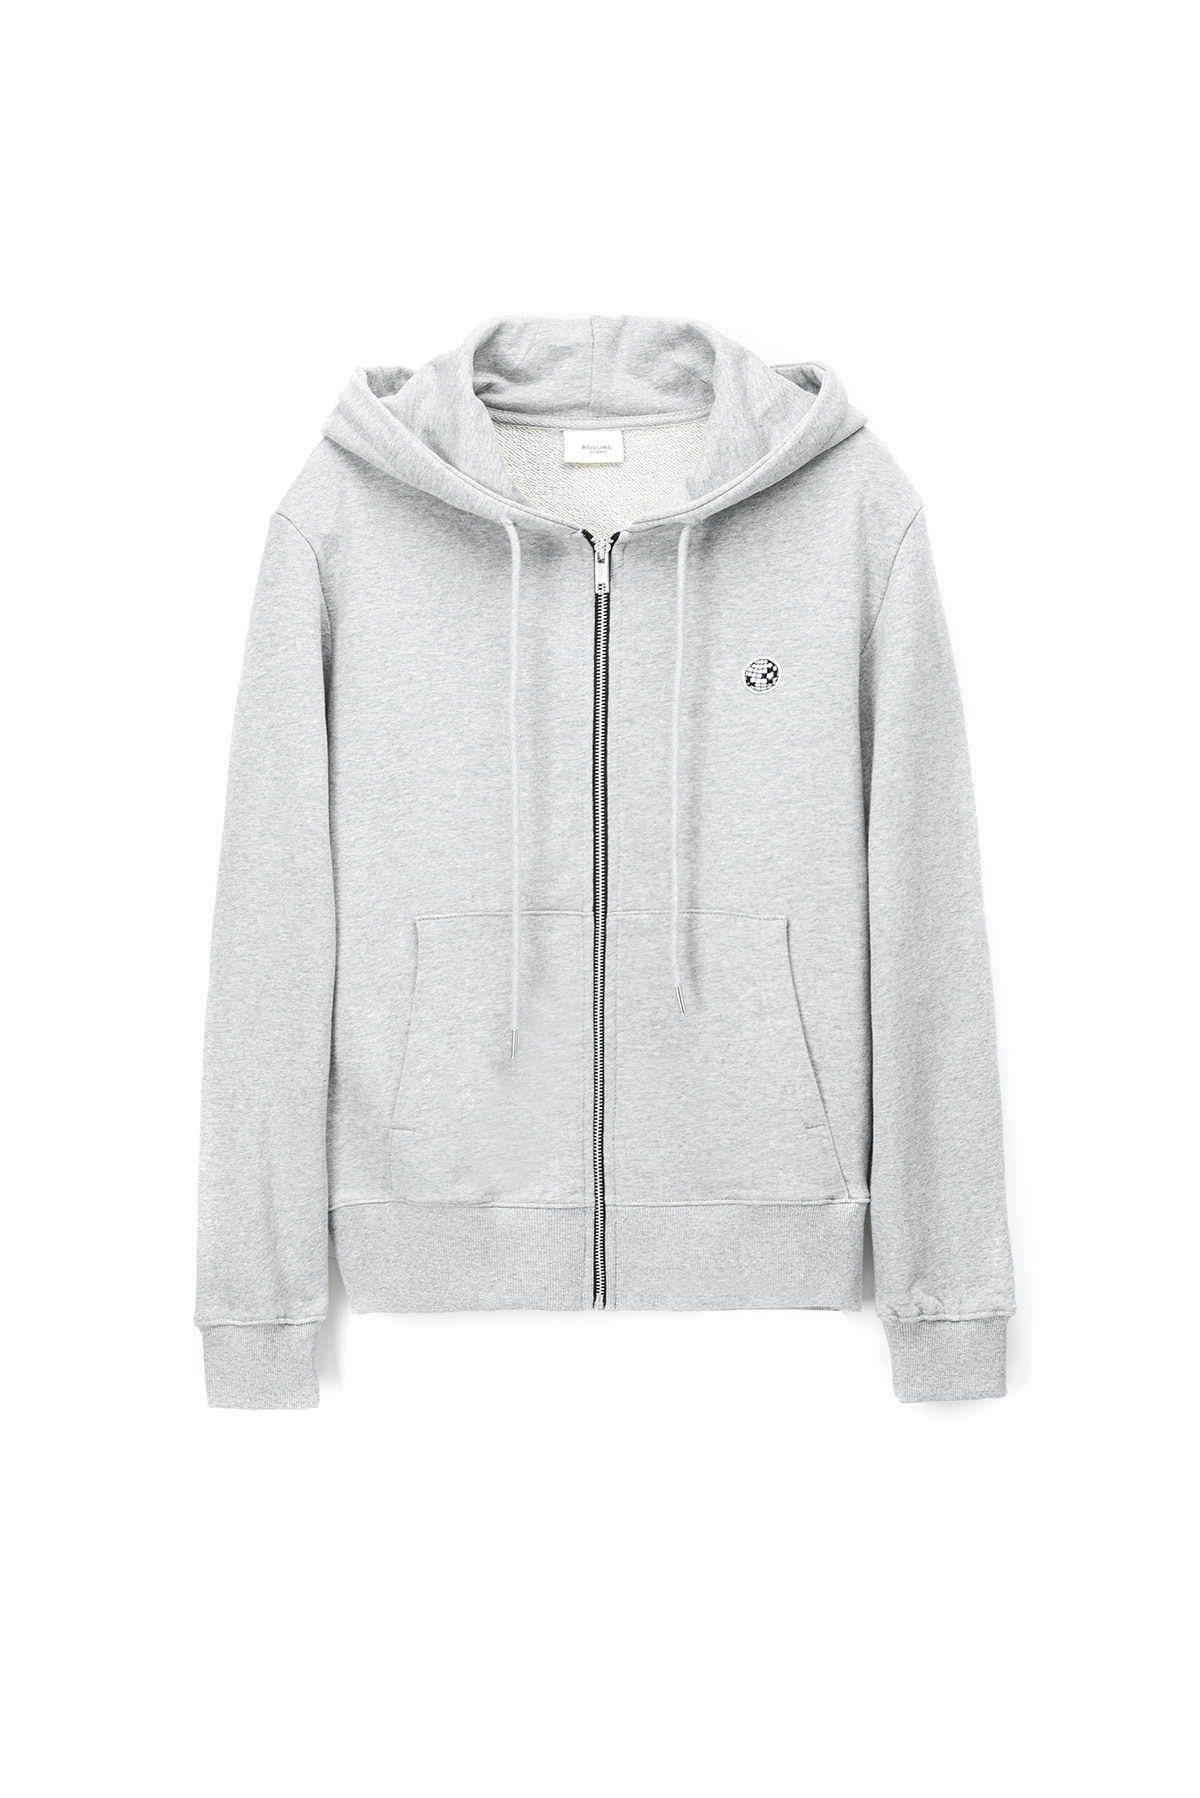 MIRRORBALL EMBROIDERED ROLLING FLOCKED ZIPPED HOODIE GREY